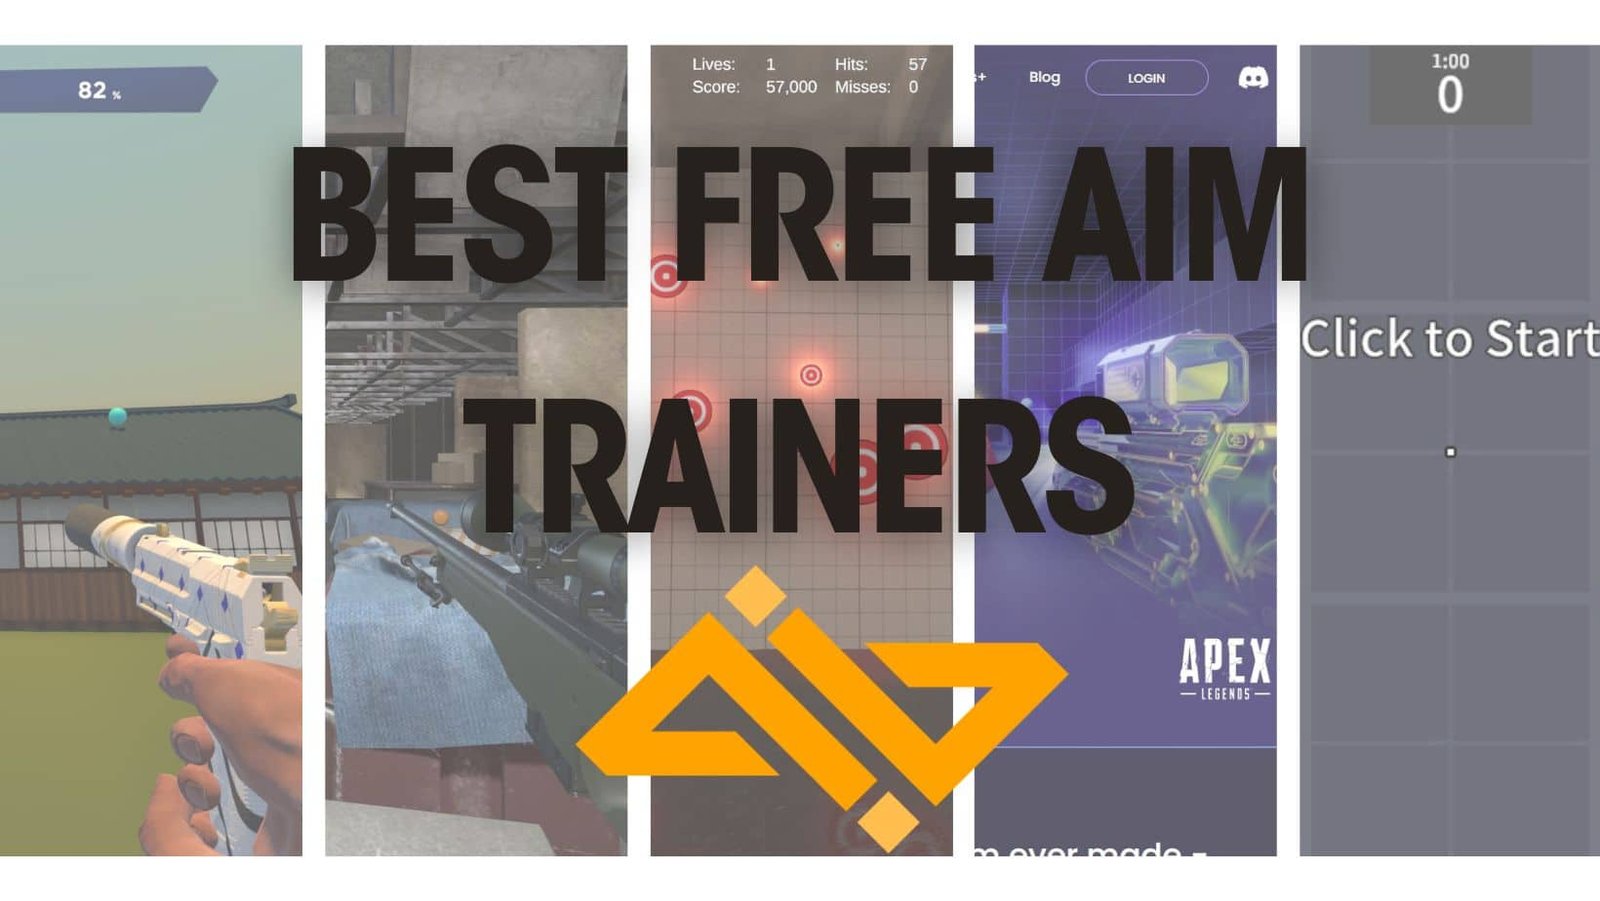 10 BEST Free Aim Trainers in 2023 - WhatIfGaming